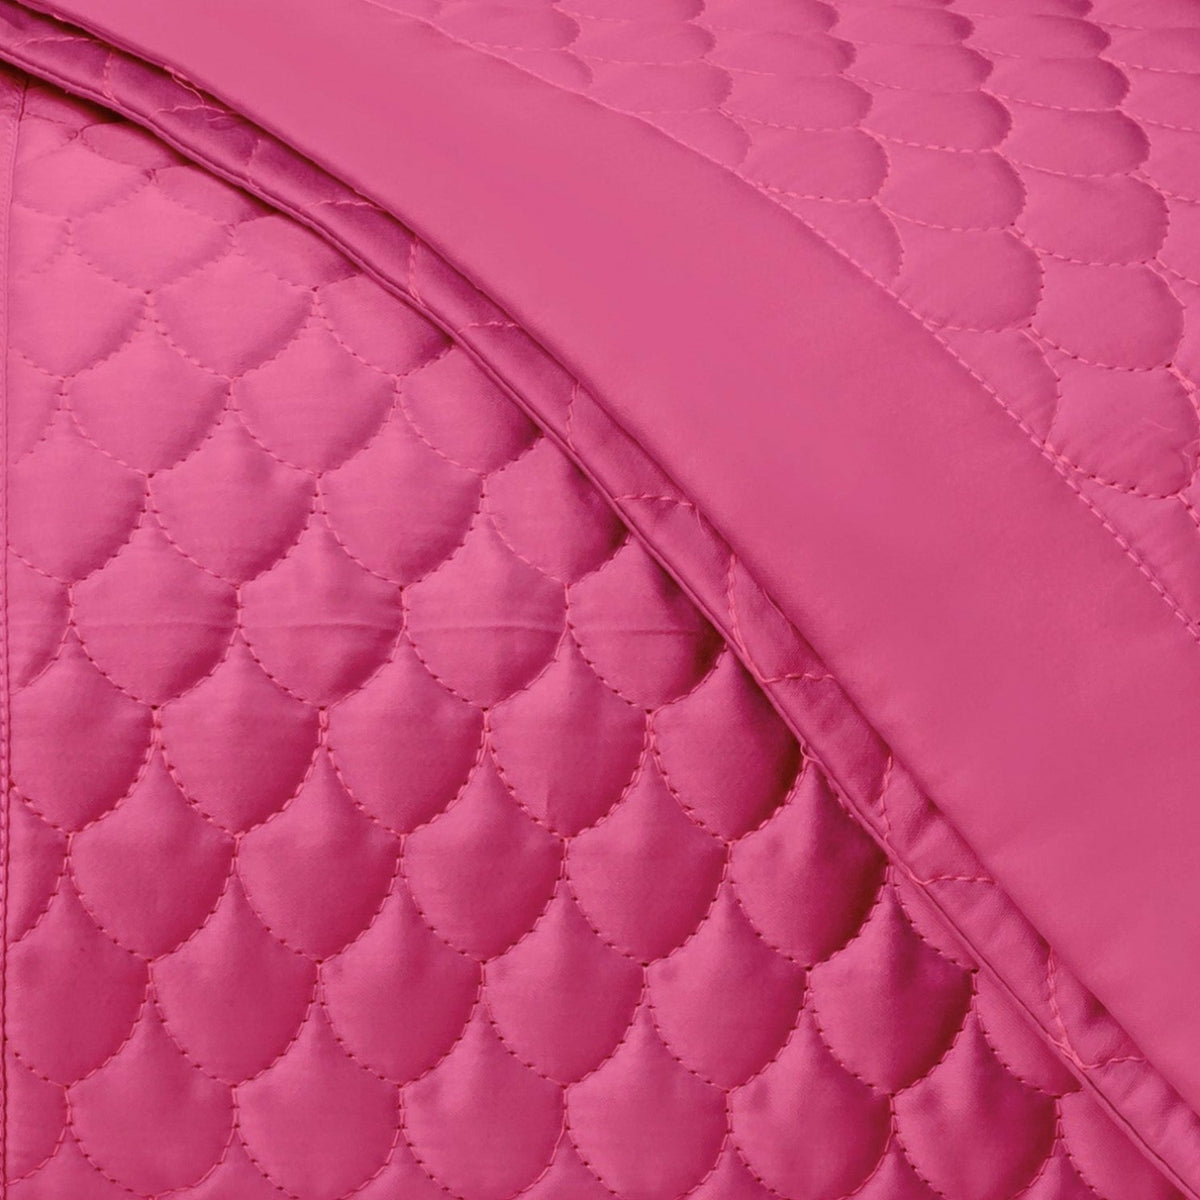 Home Treasures Raindrop Quilted Bedding Swatch Bright Pink Fine Linens